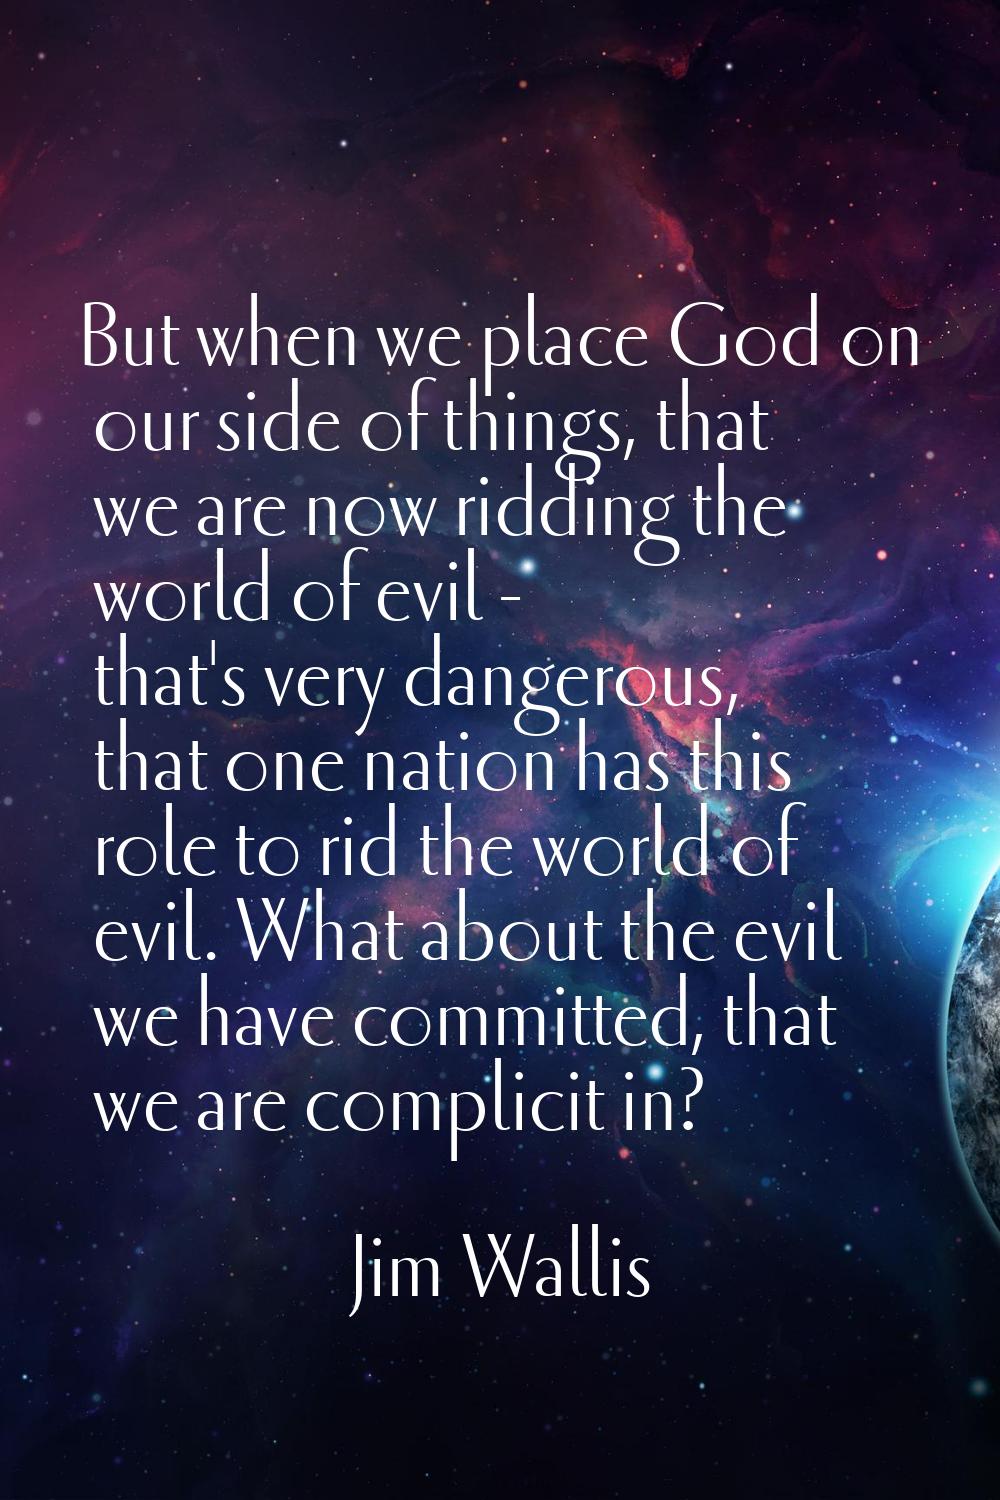 But when we place God on our side of things, that we are now ridding the world of evil - that's ver